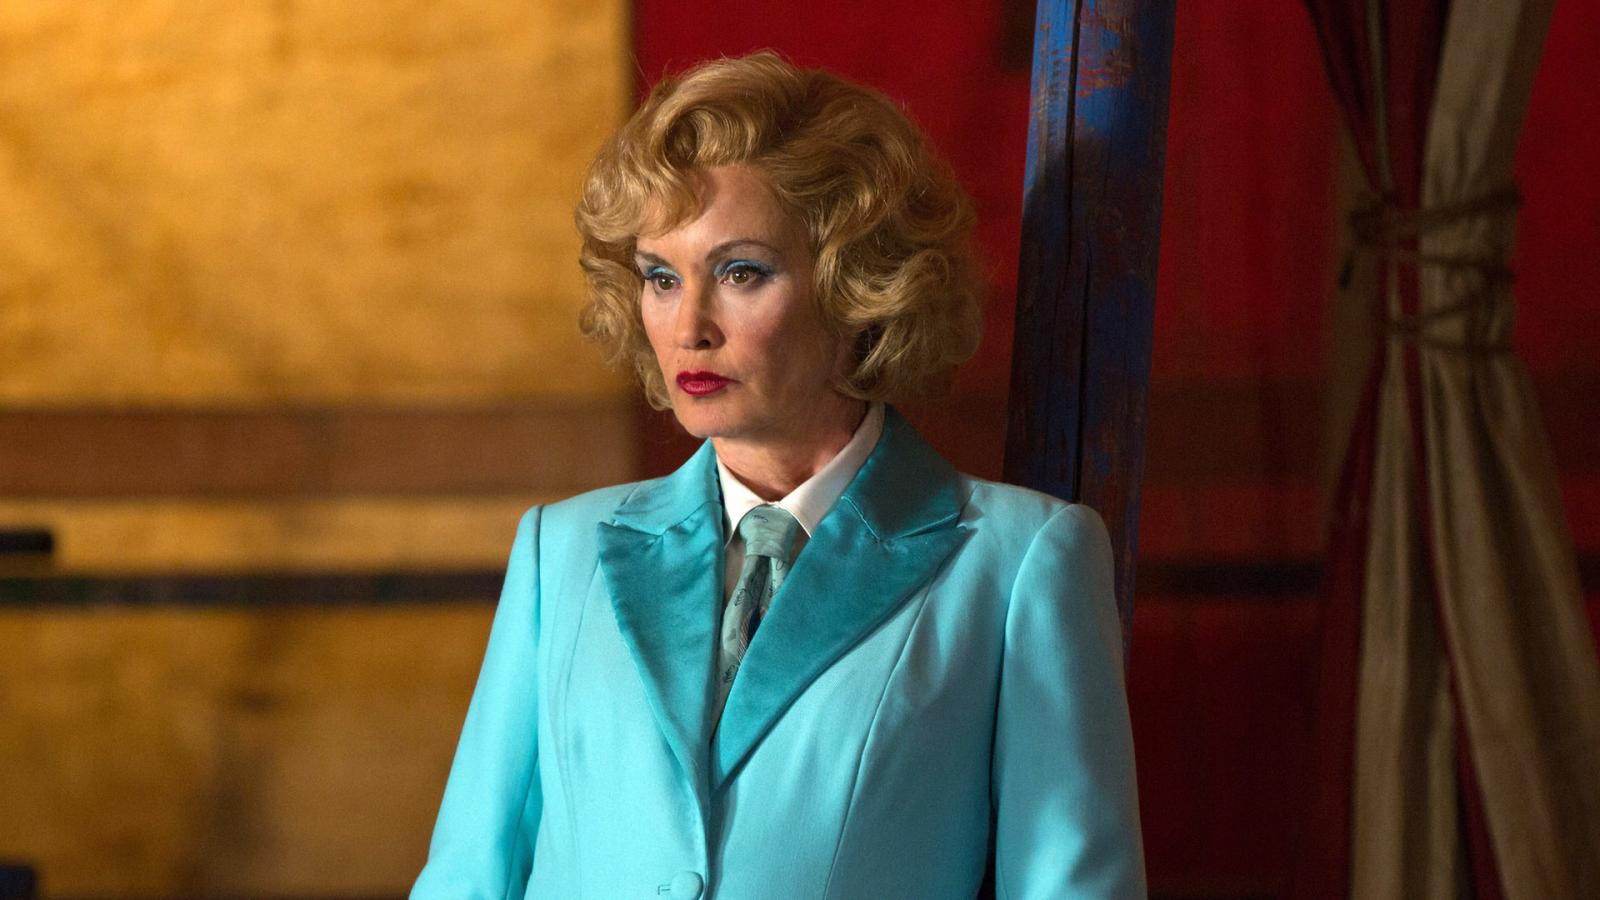 We Ranked Jessica Lange's AHS Roles, And The Winner Will Surprise You - image 1